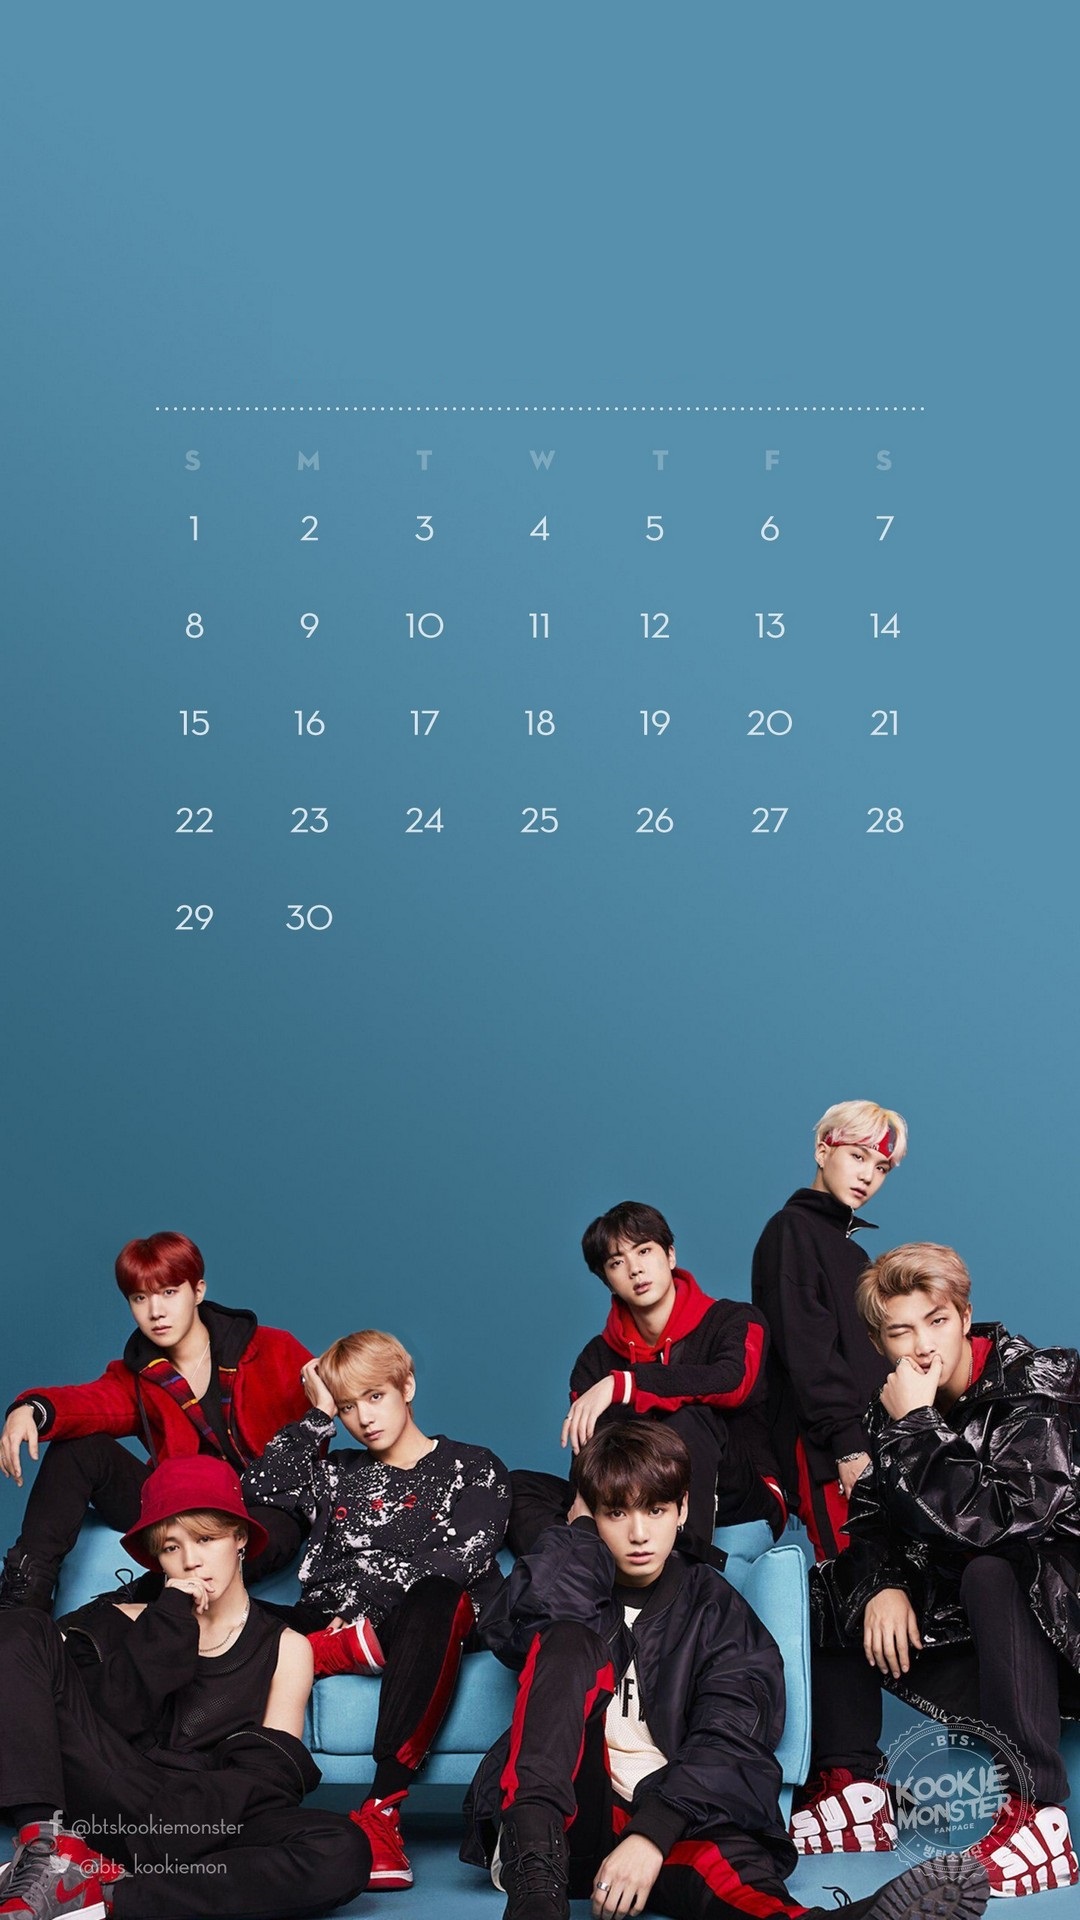 Wallpapers iPhone BTS With high-resolution 1080X1920 pixel. You can use this wallpaper for your iPhone 5, 6, 7, 8, X, XS, XR backgrounds, Mobile Screensaver, or iPad Lock Screen